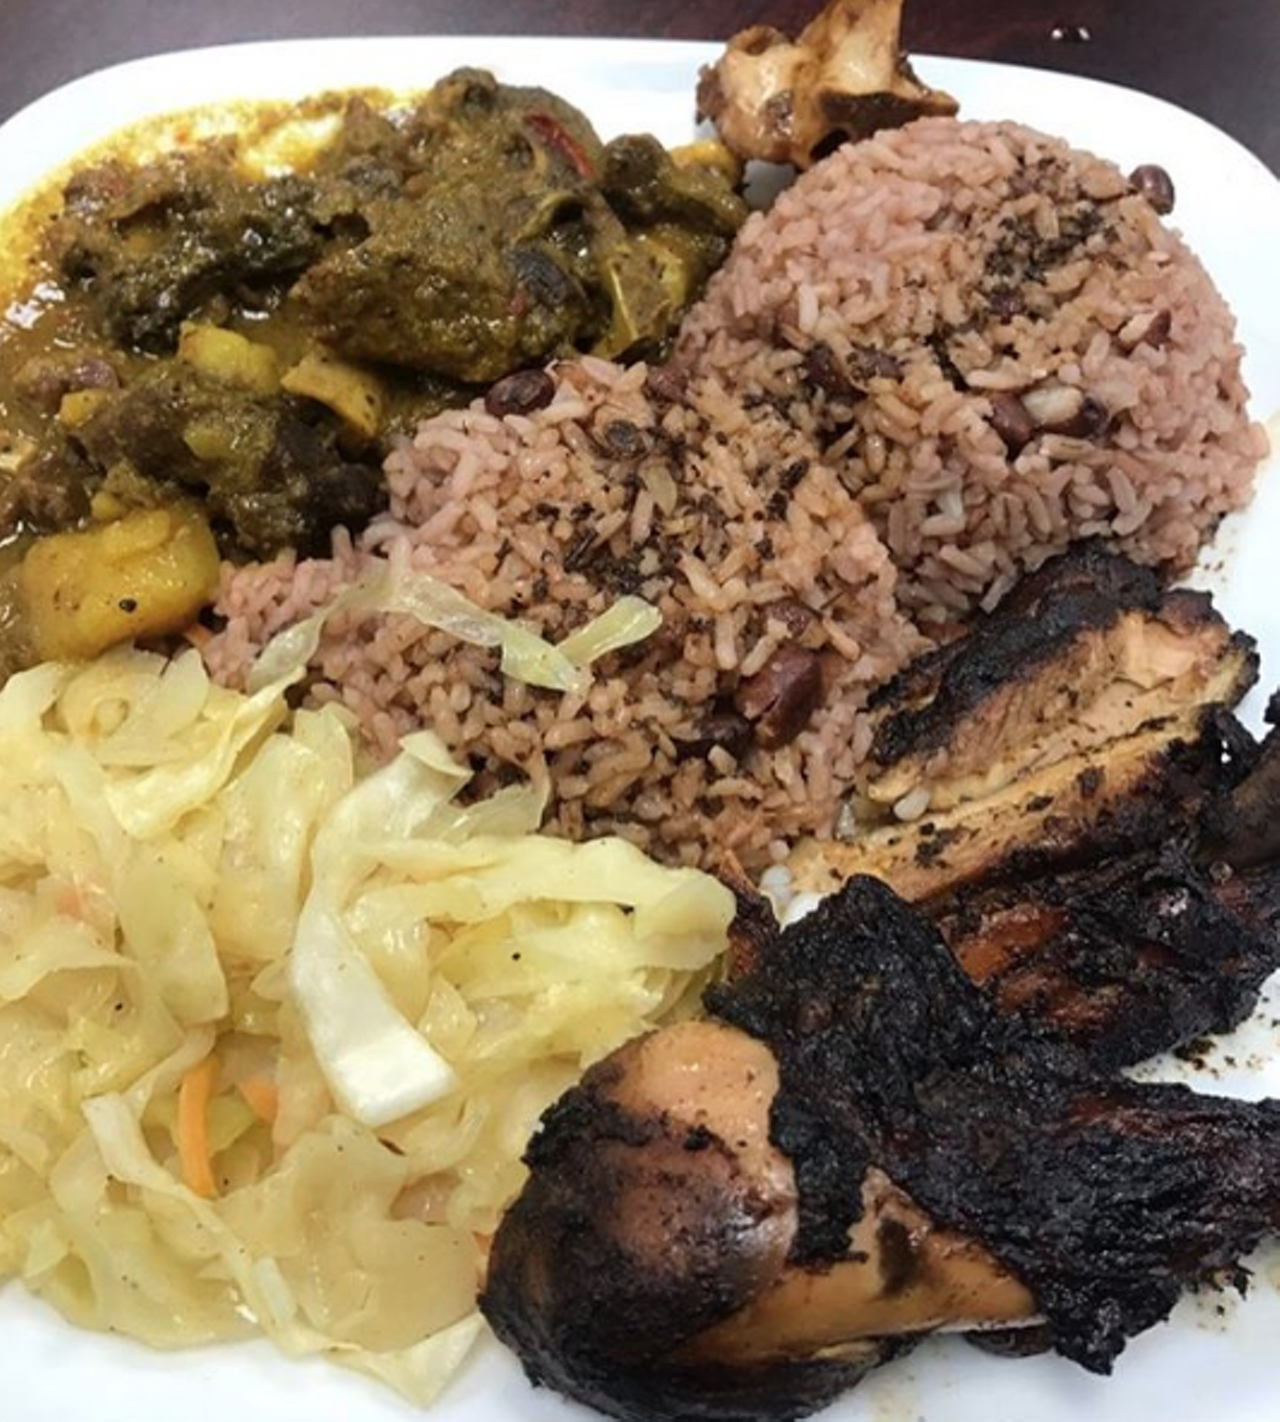 Jamaica Jamaica Cuisine
2026 Austin Hwy, /jamaicajamaicacuisine.com
A favorite for Carribbean fare, Jamaica Jamaica holds it down with its jerk chicken, curry goat, oxtails and more. There’s also vegetarian options! Now these folks even serve up brunch, and we’re so thankful.
Photo via Instagram / motiv8_mac